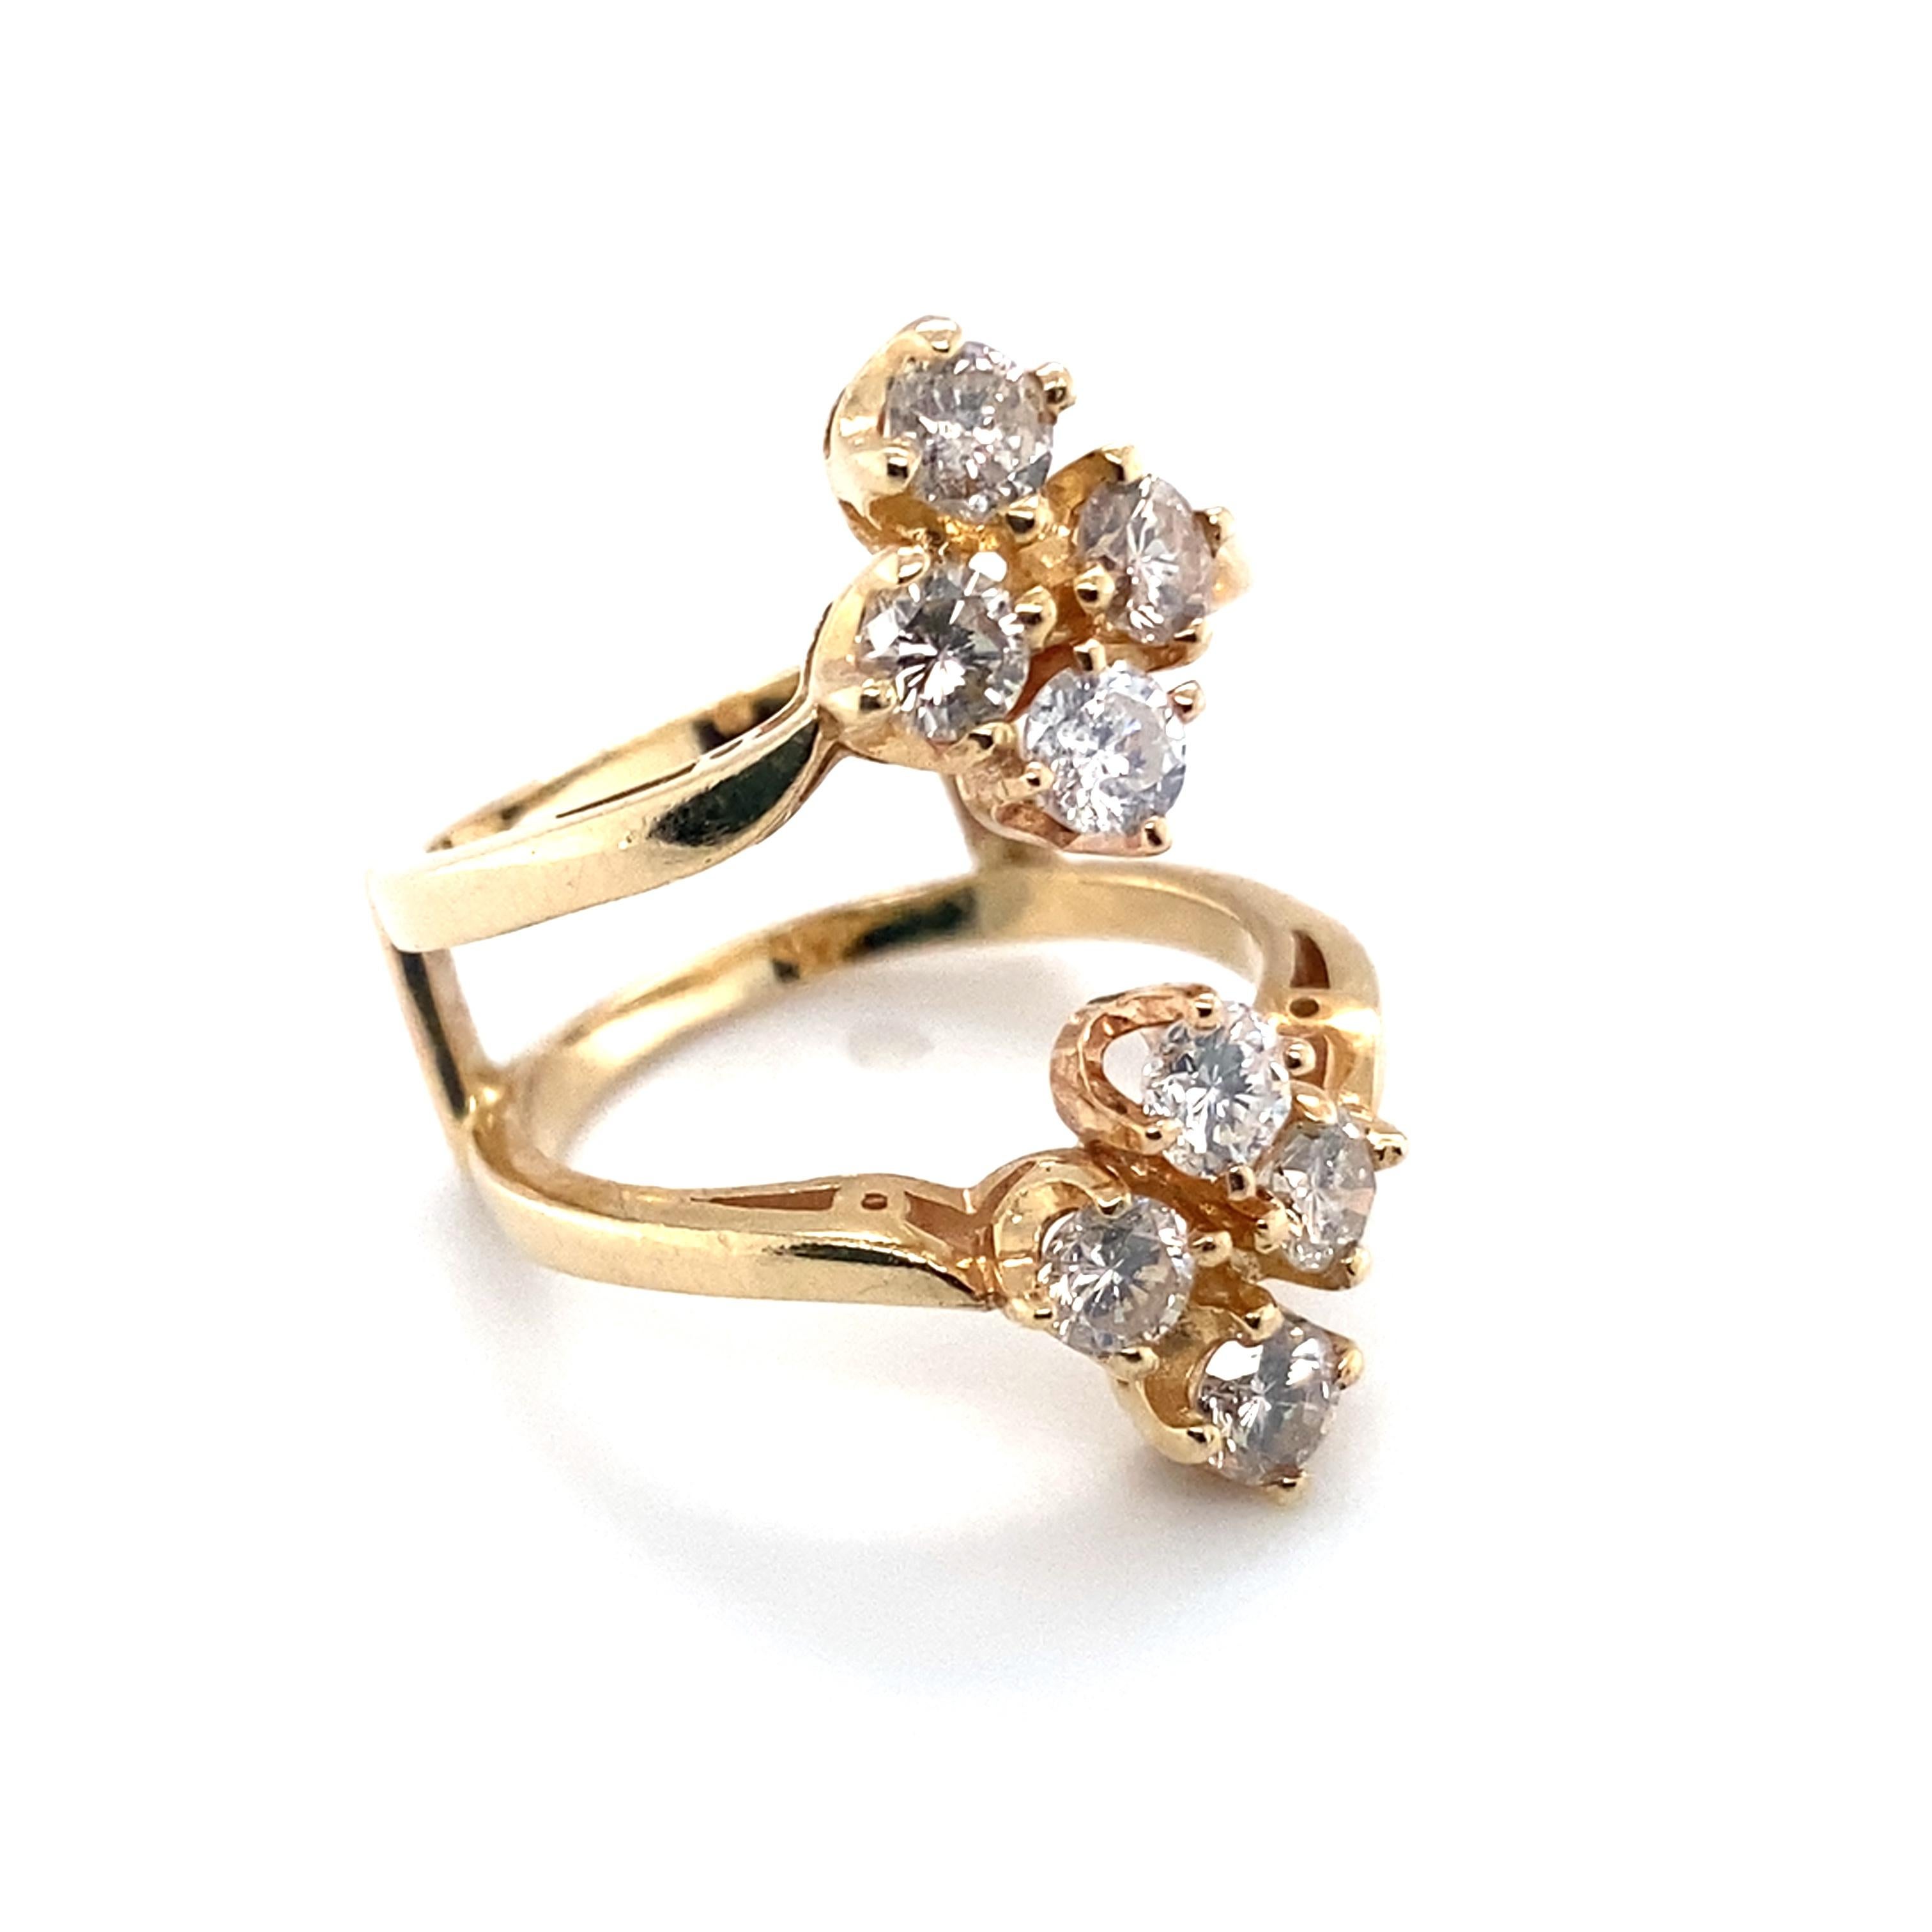 Item Details: 
Metal: 14 Karat Yellow Gold 
Weight: 5.9 grams
Size: 5, can be resizable 

Diamond Details: 
Total: Contains 8 diamonds 
Carat: 1 carat total weight 

Item Features: 
This beautiful 1 carat diamond ring guard contains a total of 8